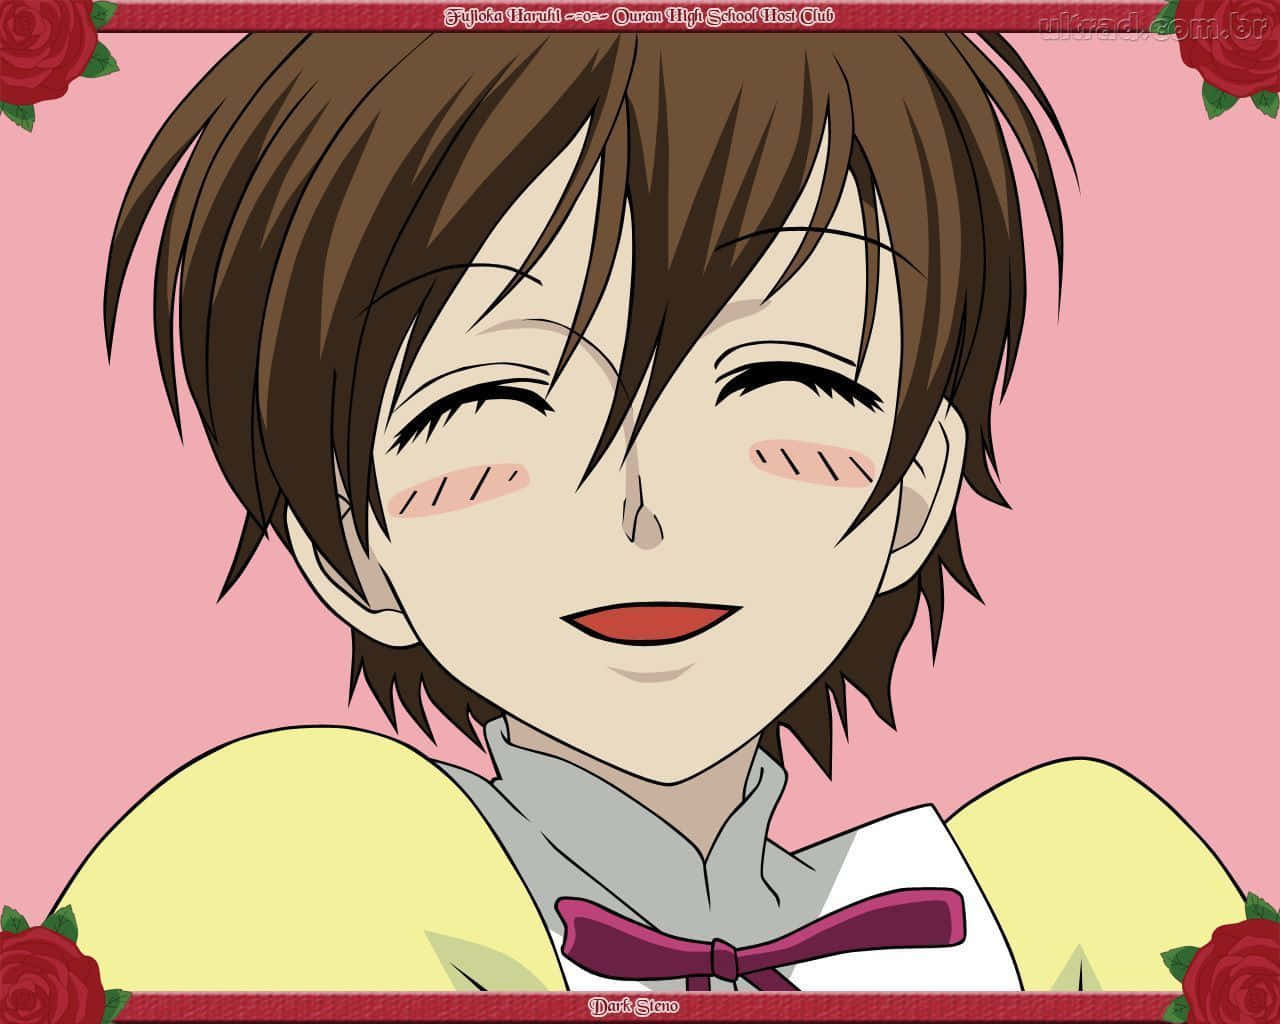 Haruhi Fujioka standing confidently in front of a scenic background Wallpaper